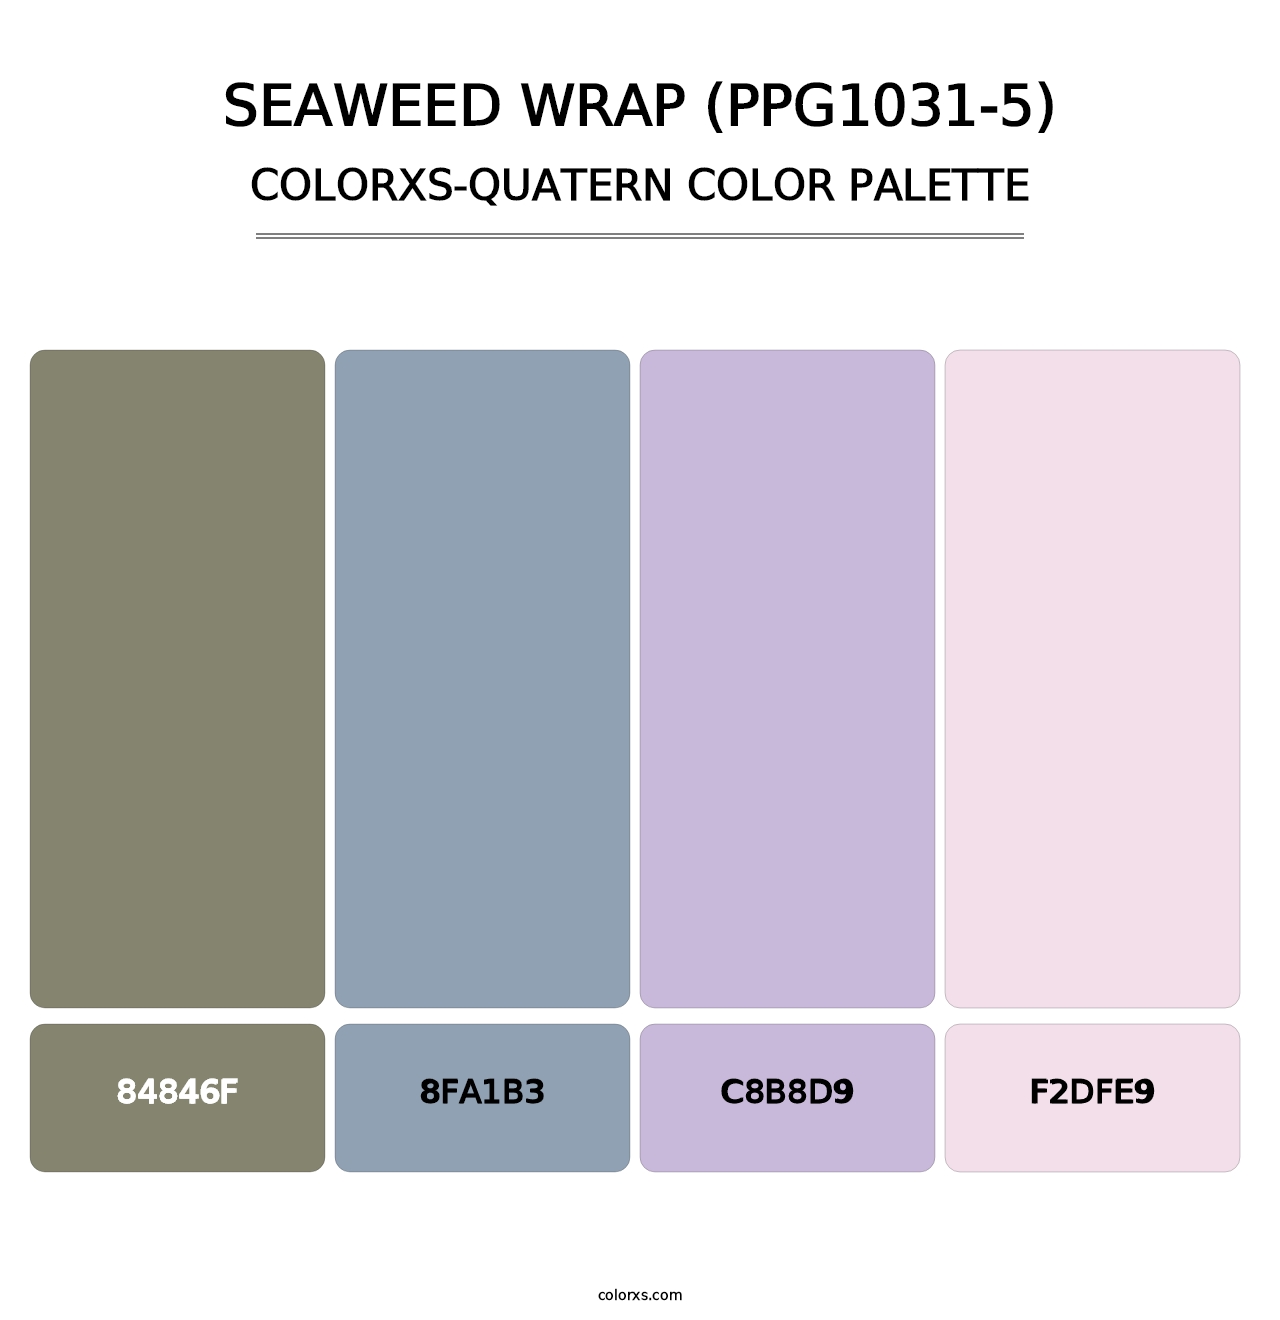 Seaweed Wrap (PPG1031-5) - Colorxs Quatern Palette